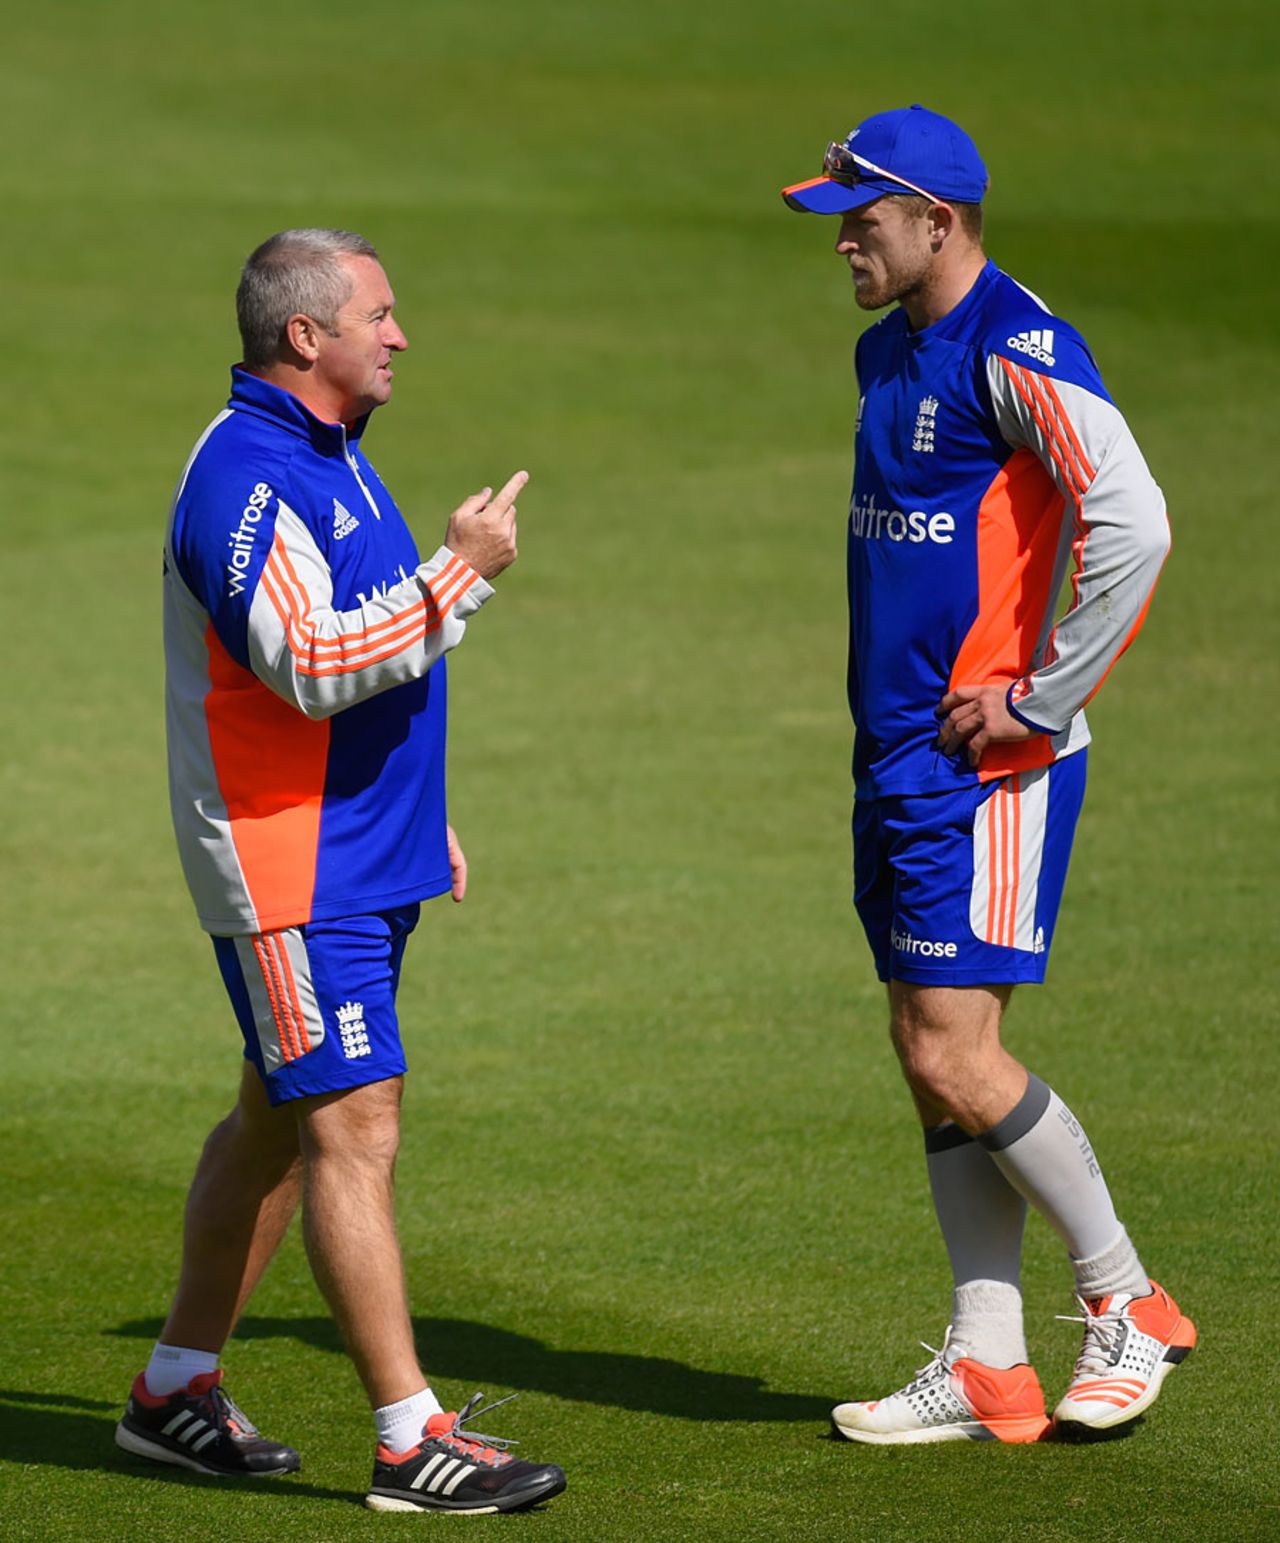 Paul Farbrace (left) chats with David Willey, Edgbaston, June 8, 2015